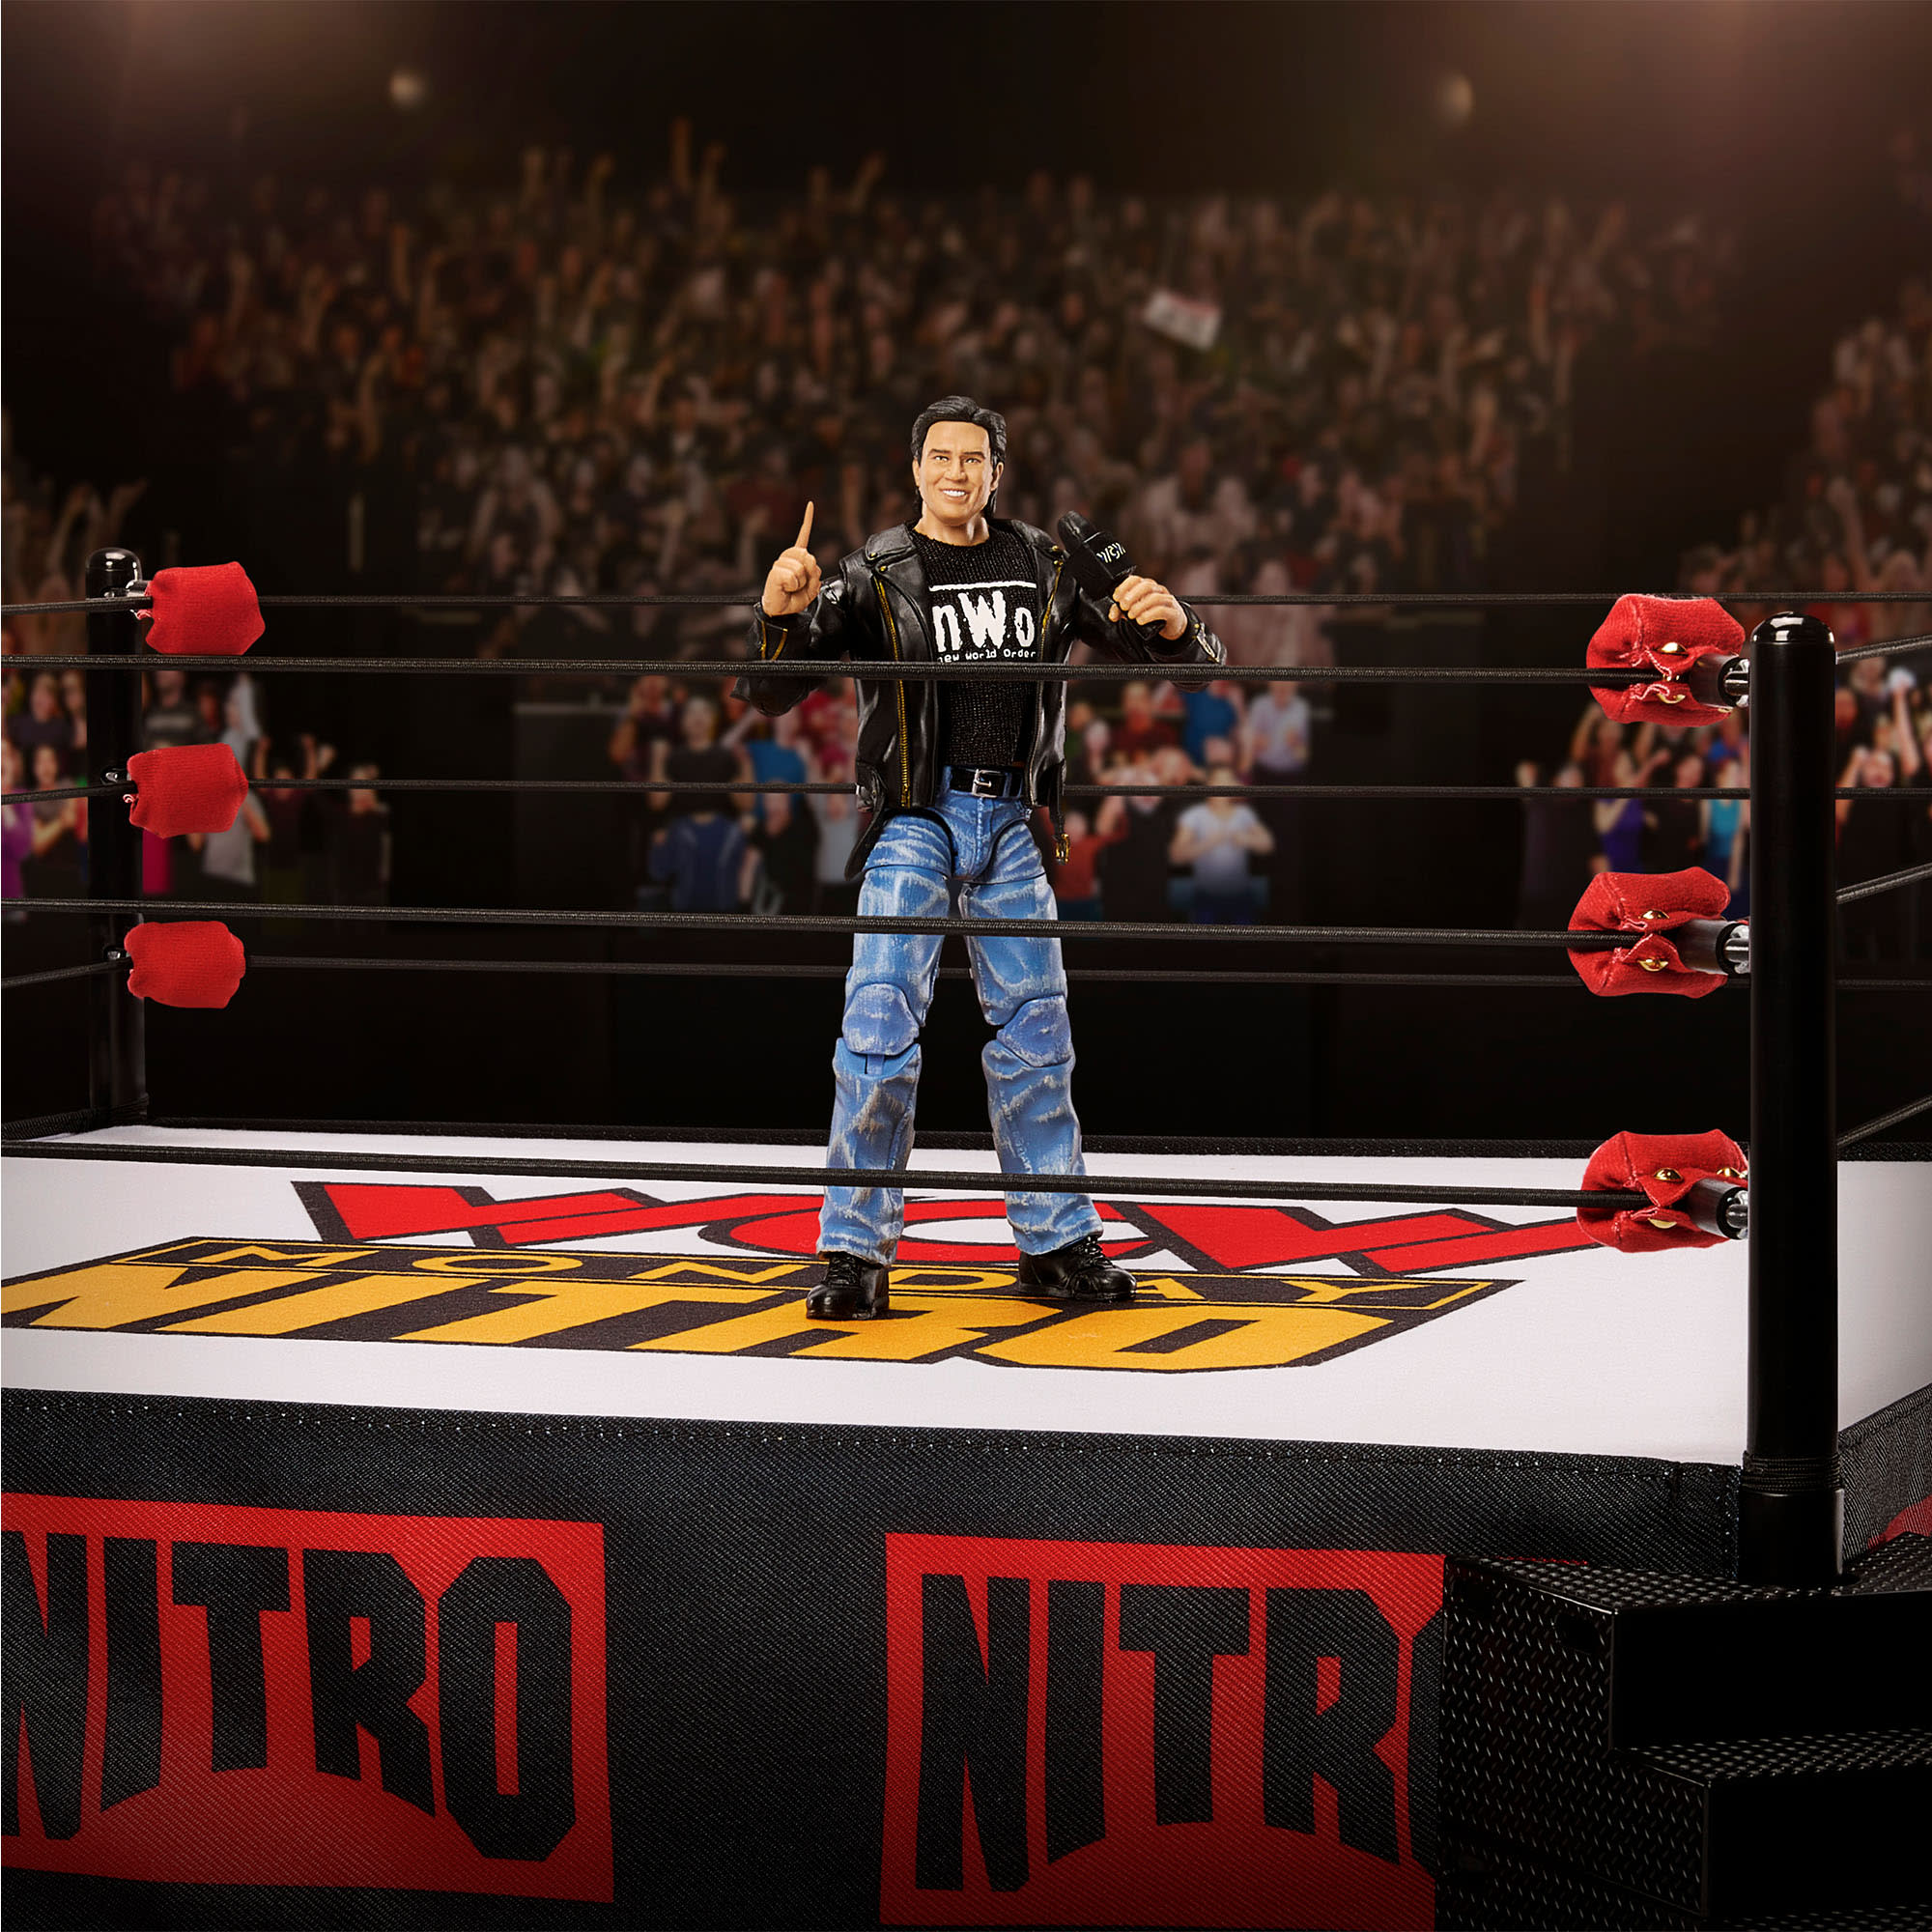 WWE Ultimate Edition WCW Monday Nitro Ring w/ Eric Bischoff